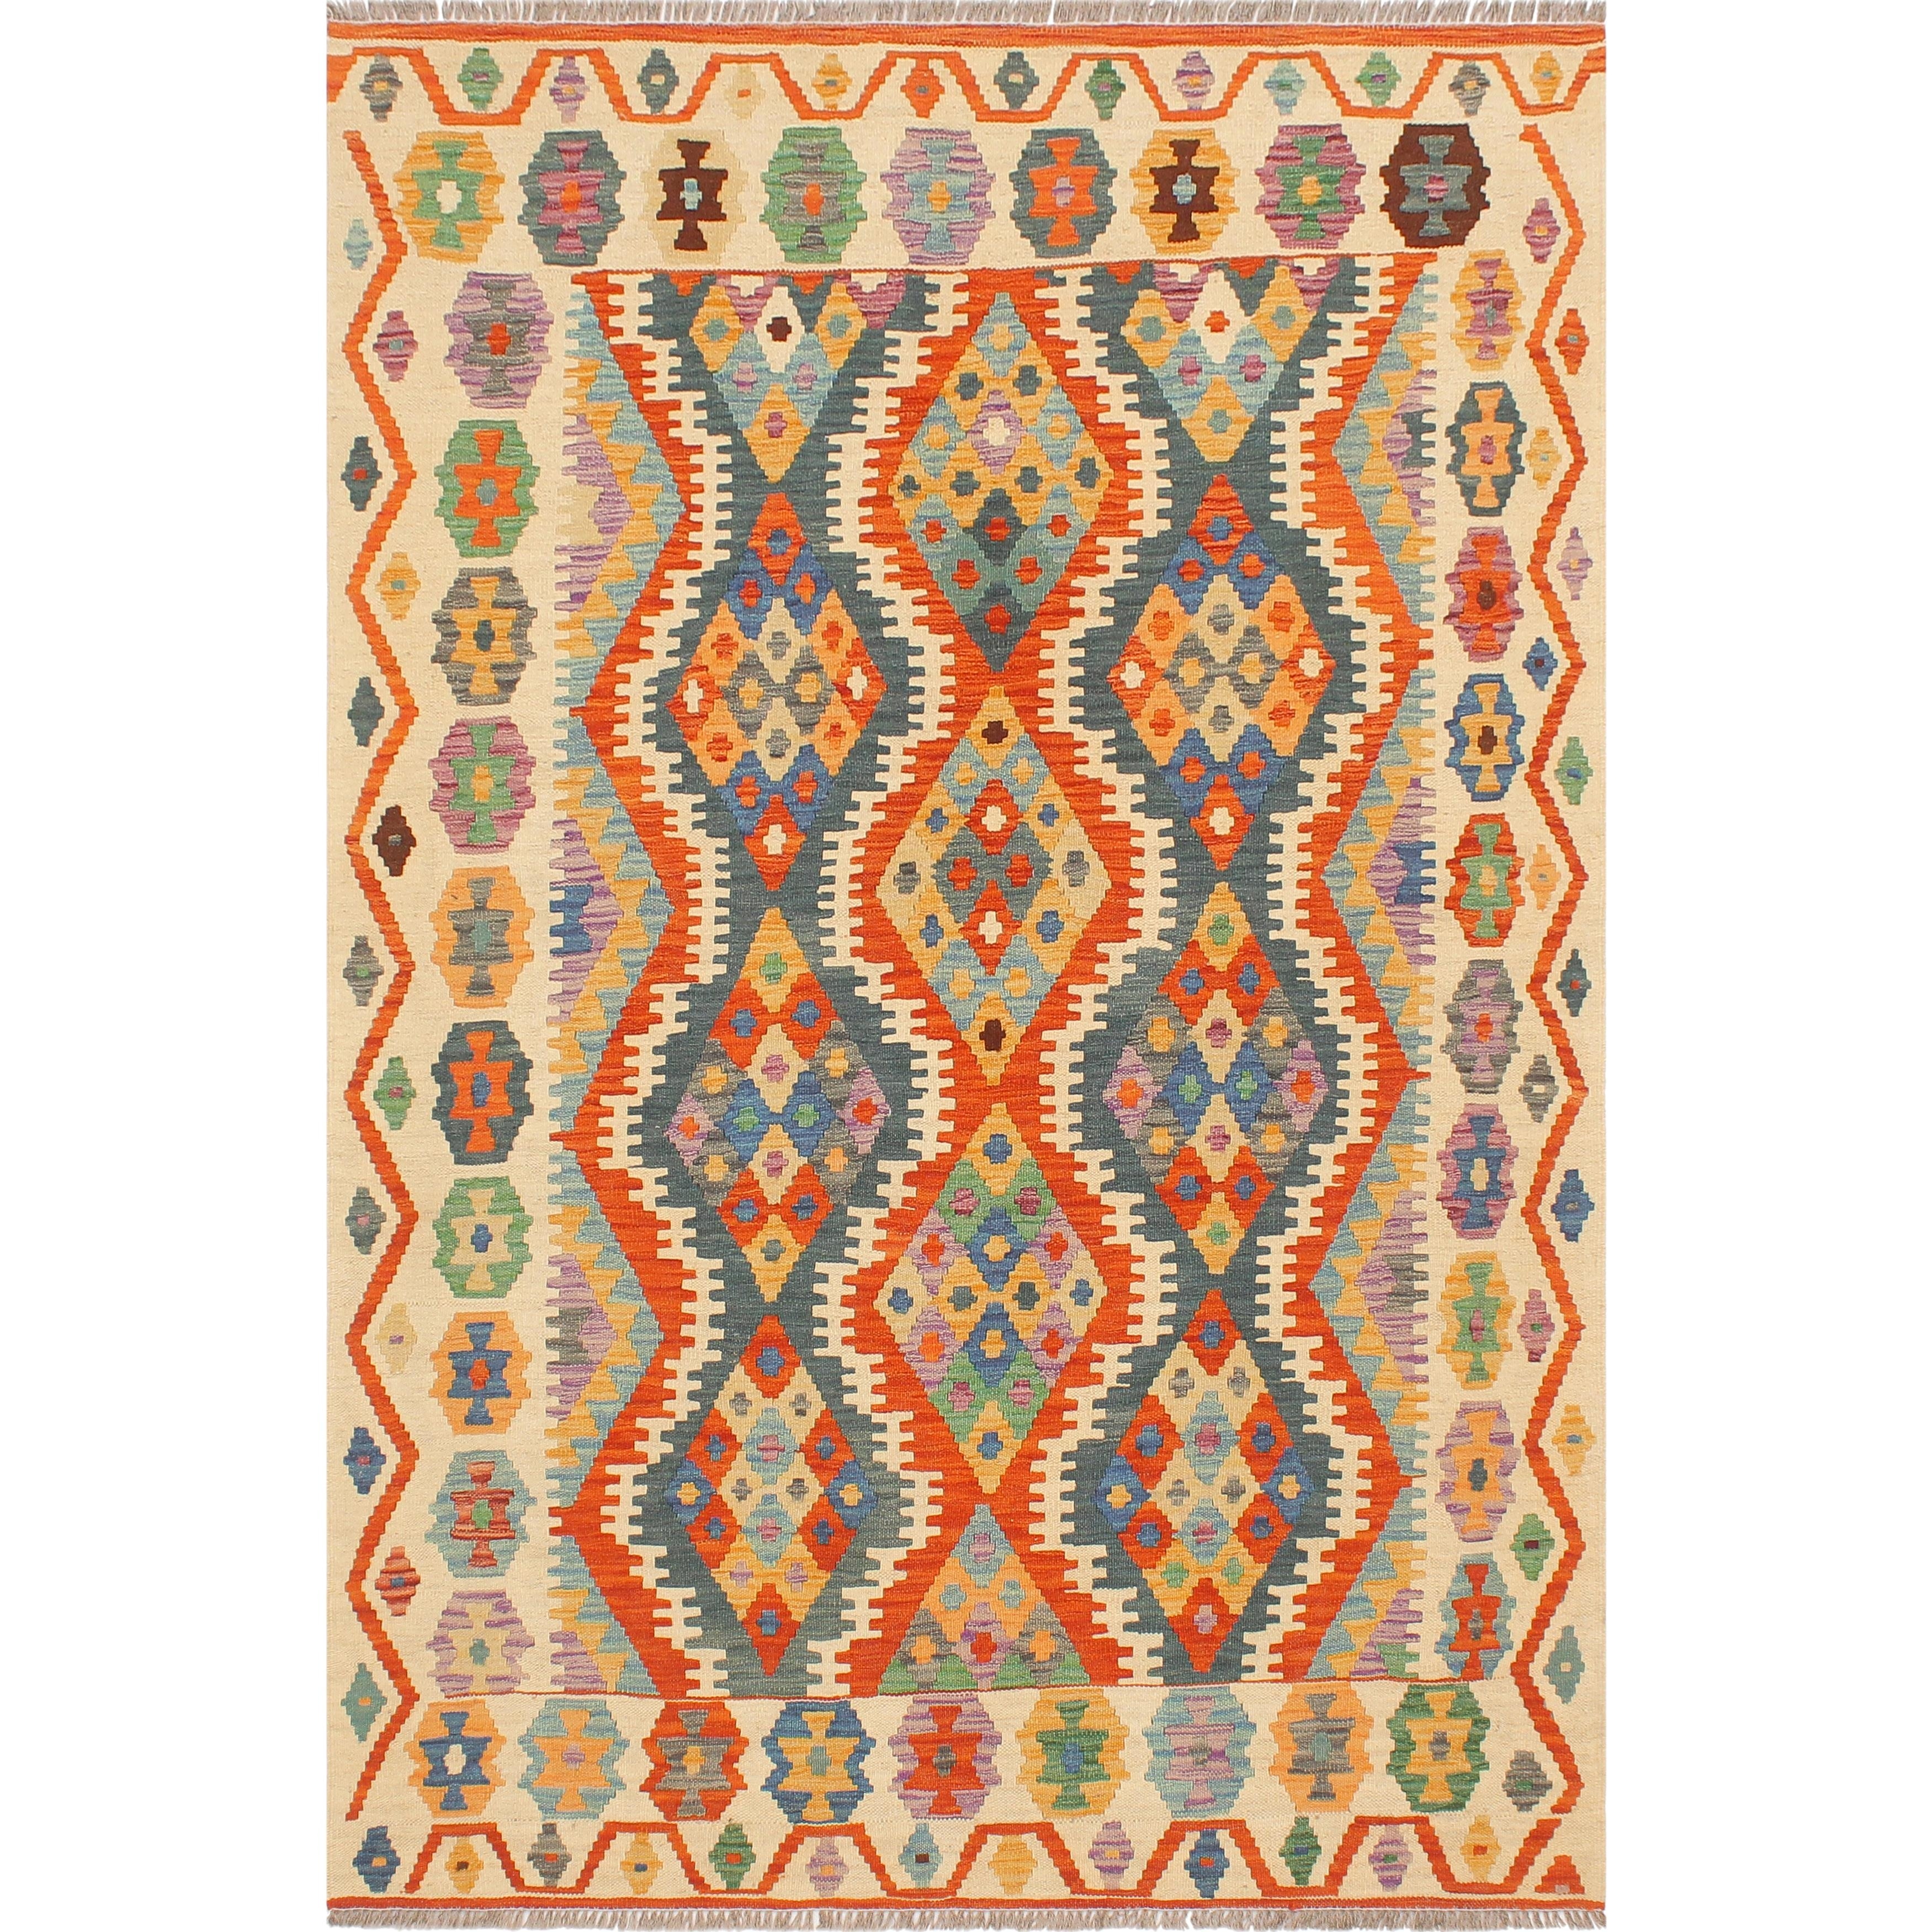 https://ak1.ostkcdn.com/images/products/is/images/direct/0878fc68bed825d9ab5b3a4476c8fe9614df46ec/Rustic-Turkish-Kilim-Lashon-Hand-Woven-Area-Rug.jpg